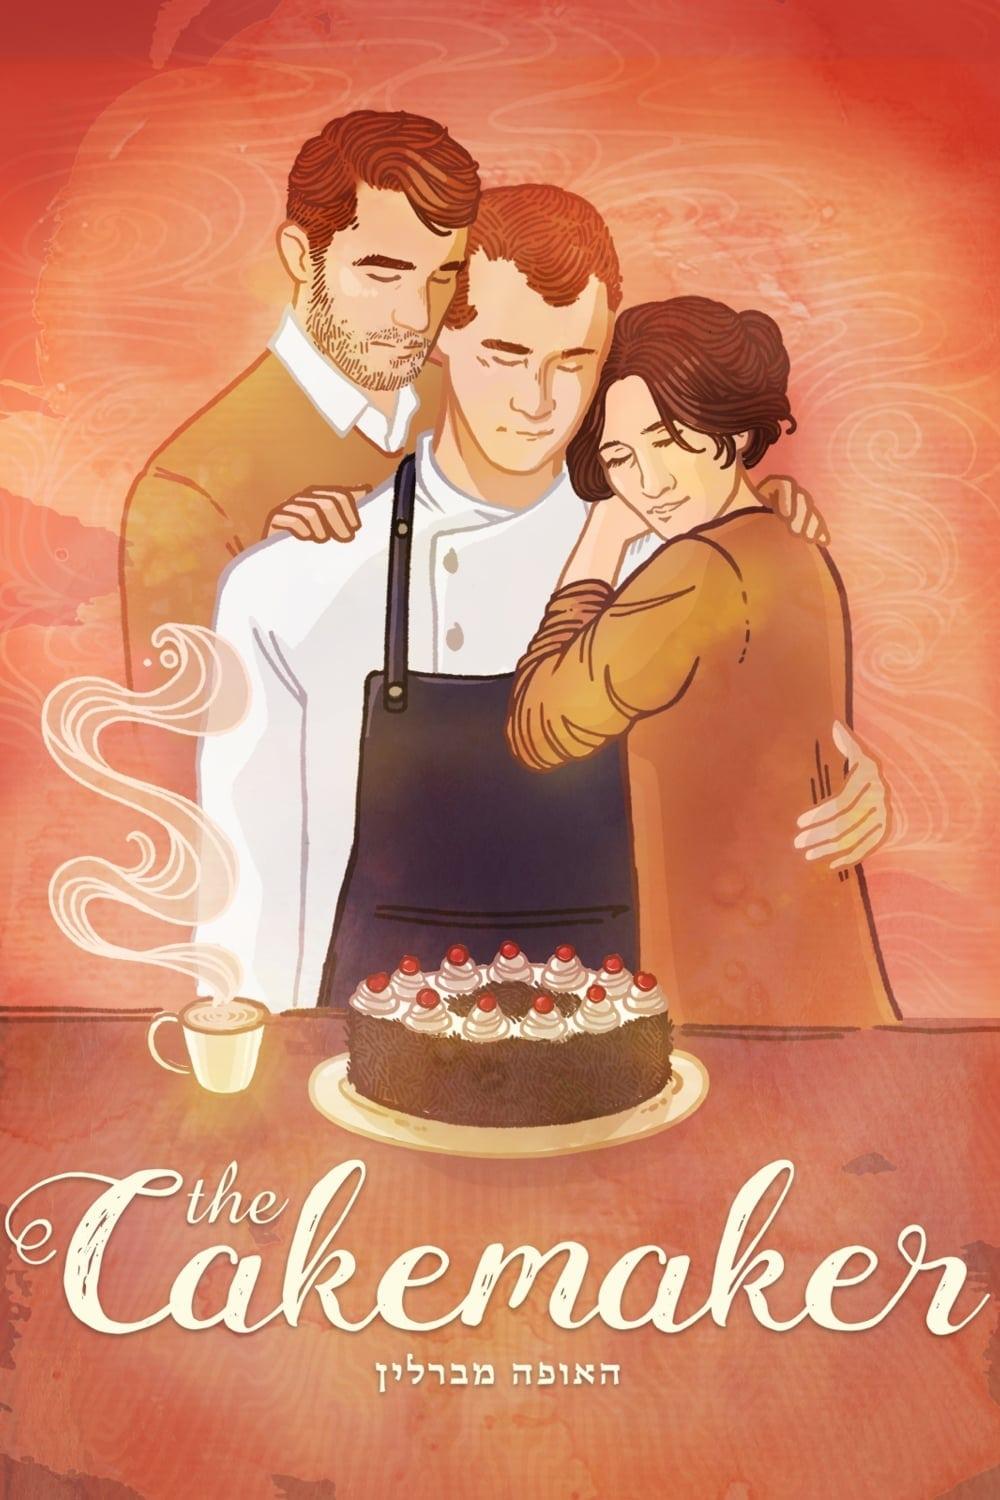 The Cakemaker poster